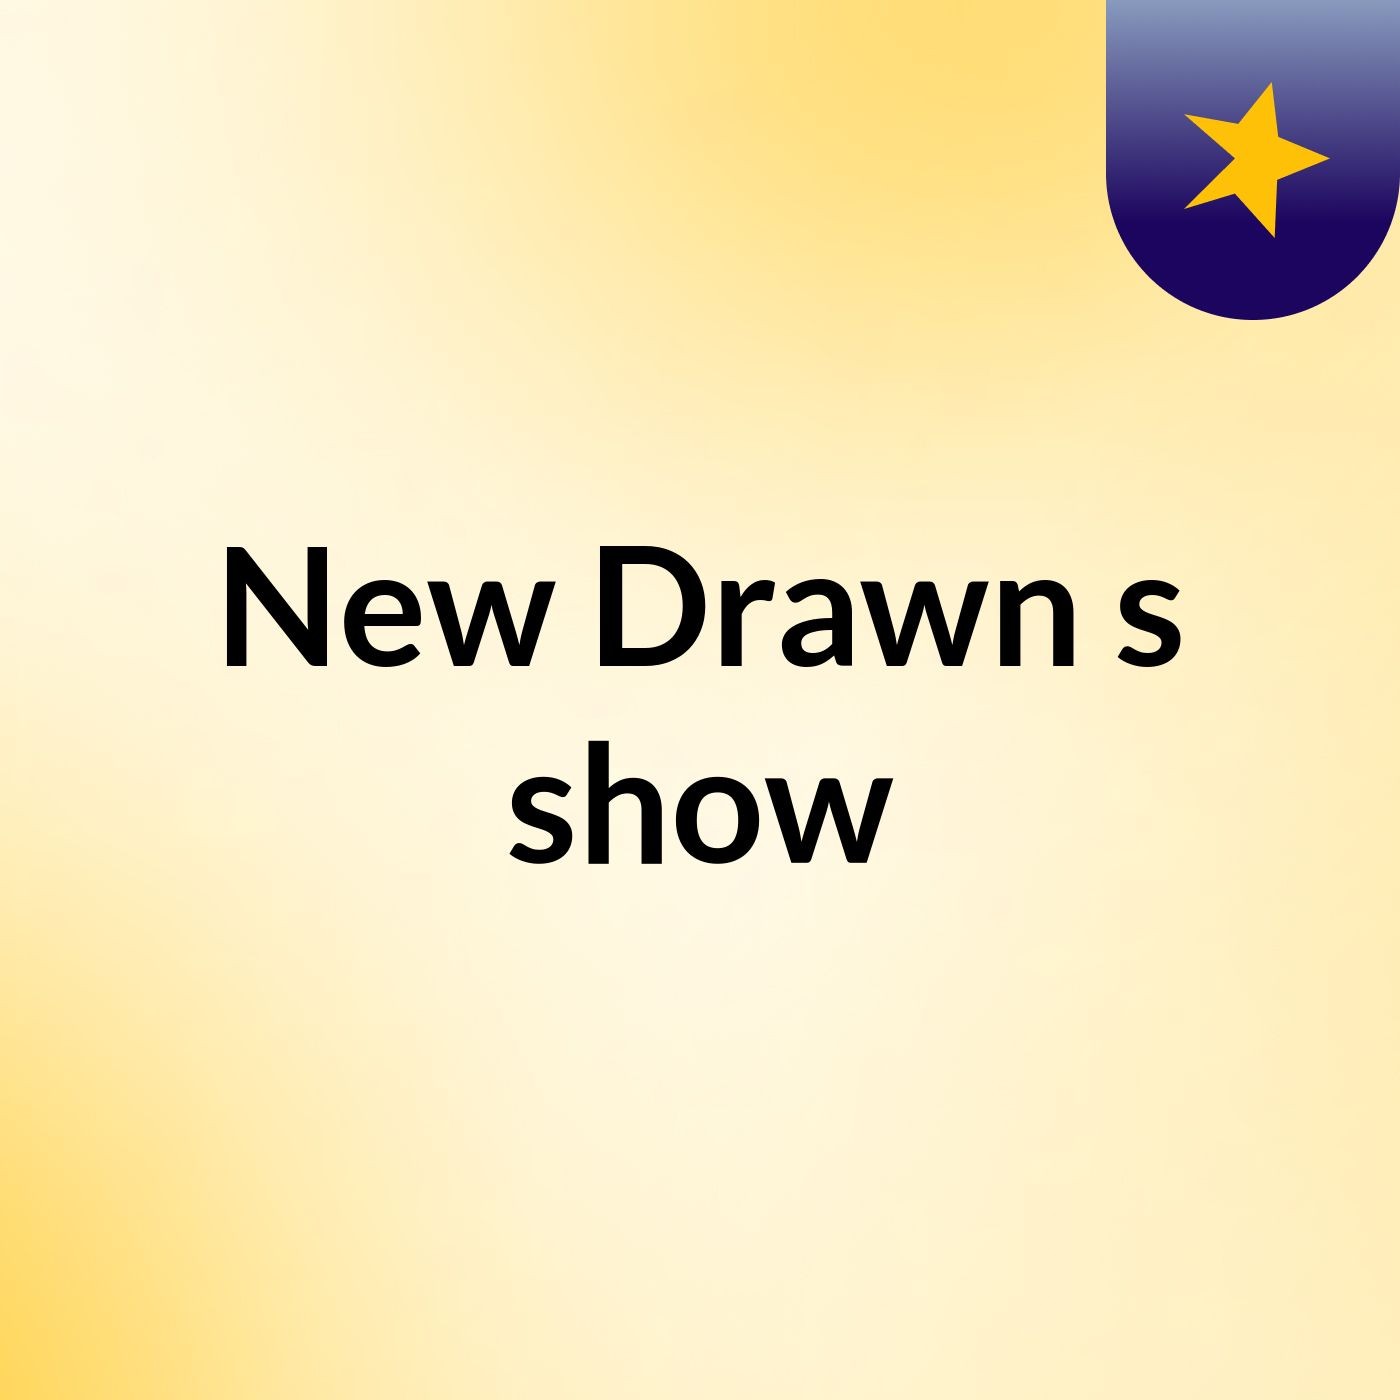 New Drawn's show